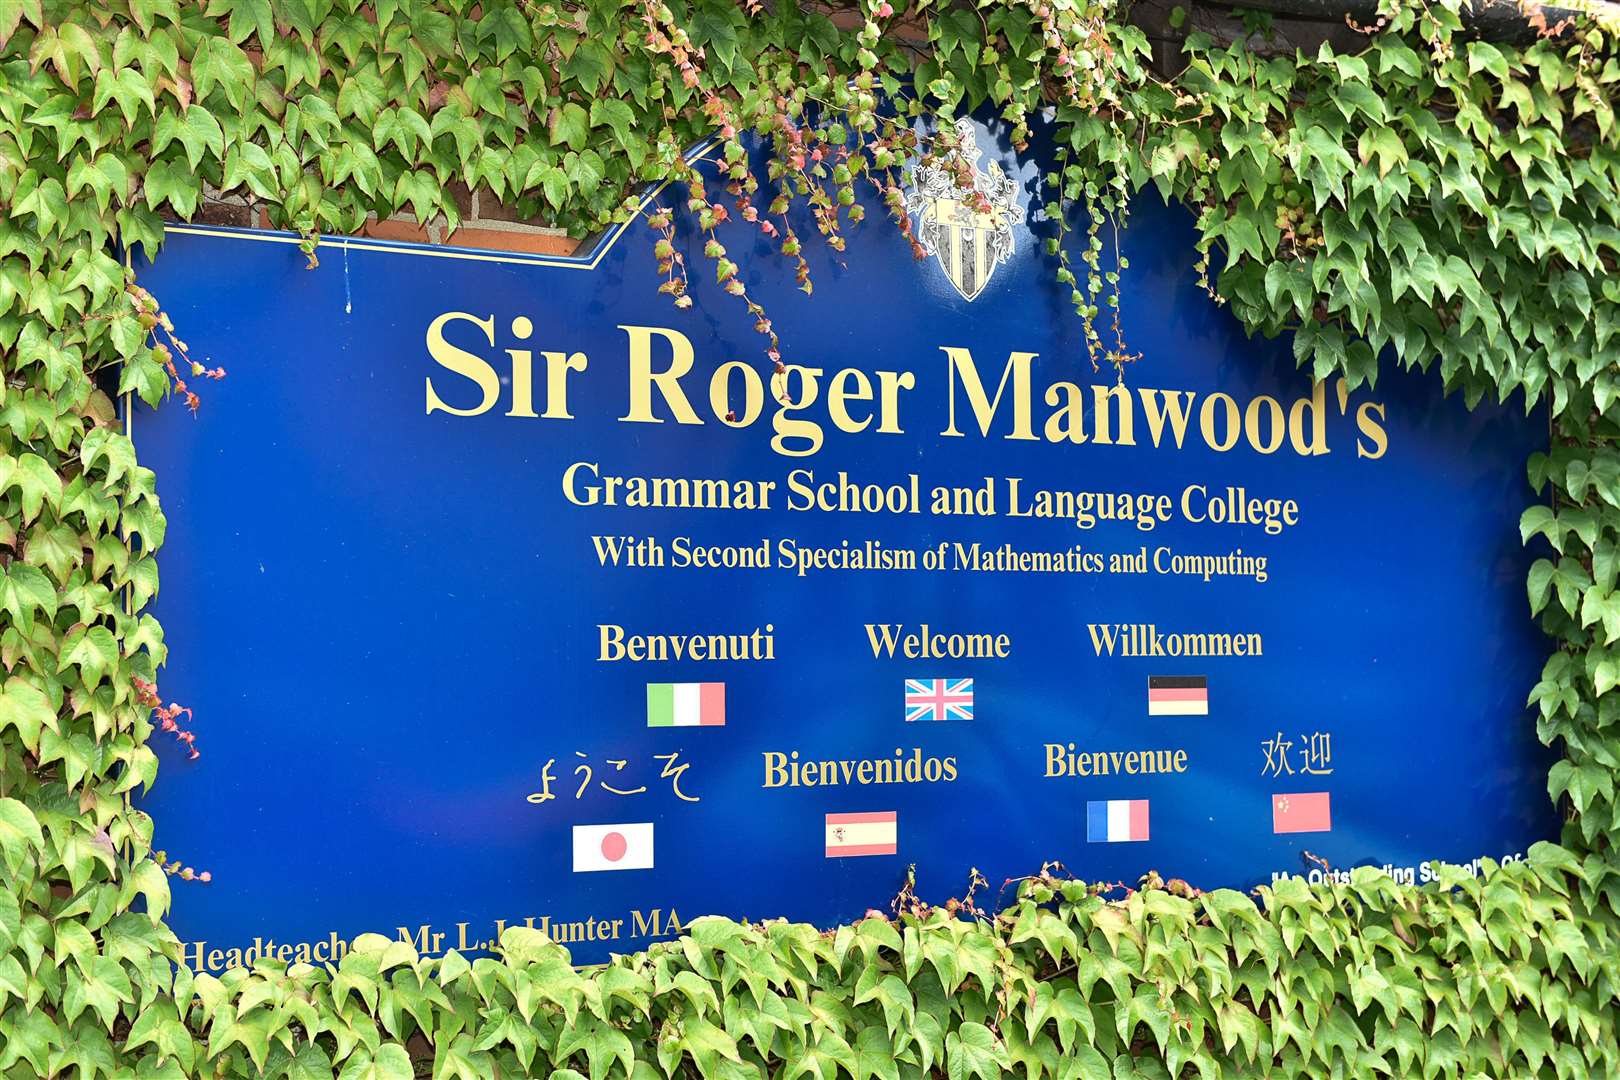 Sir Roger Manwood's School is supporting Earth Day